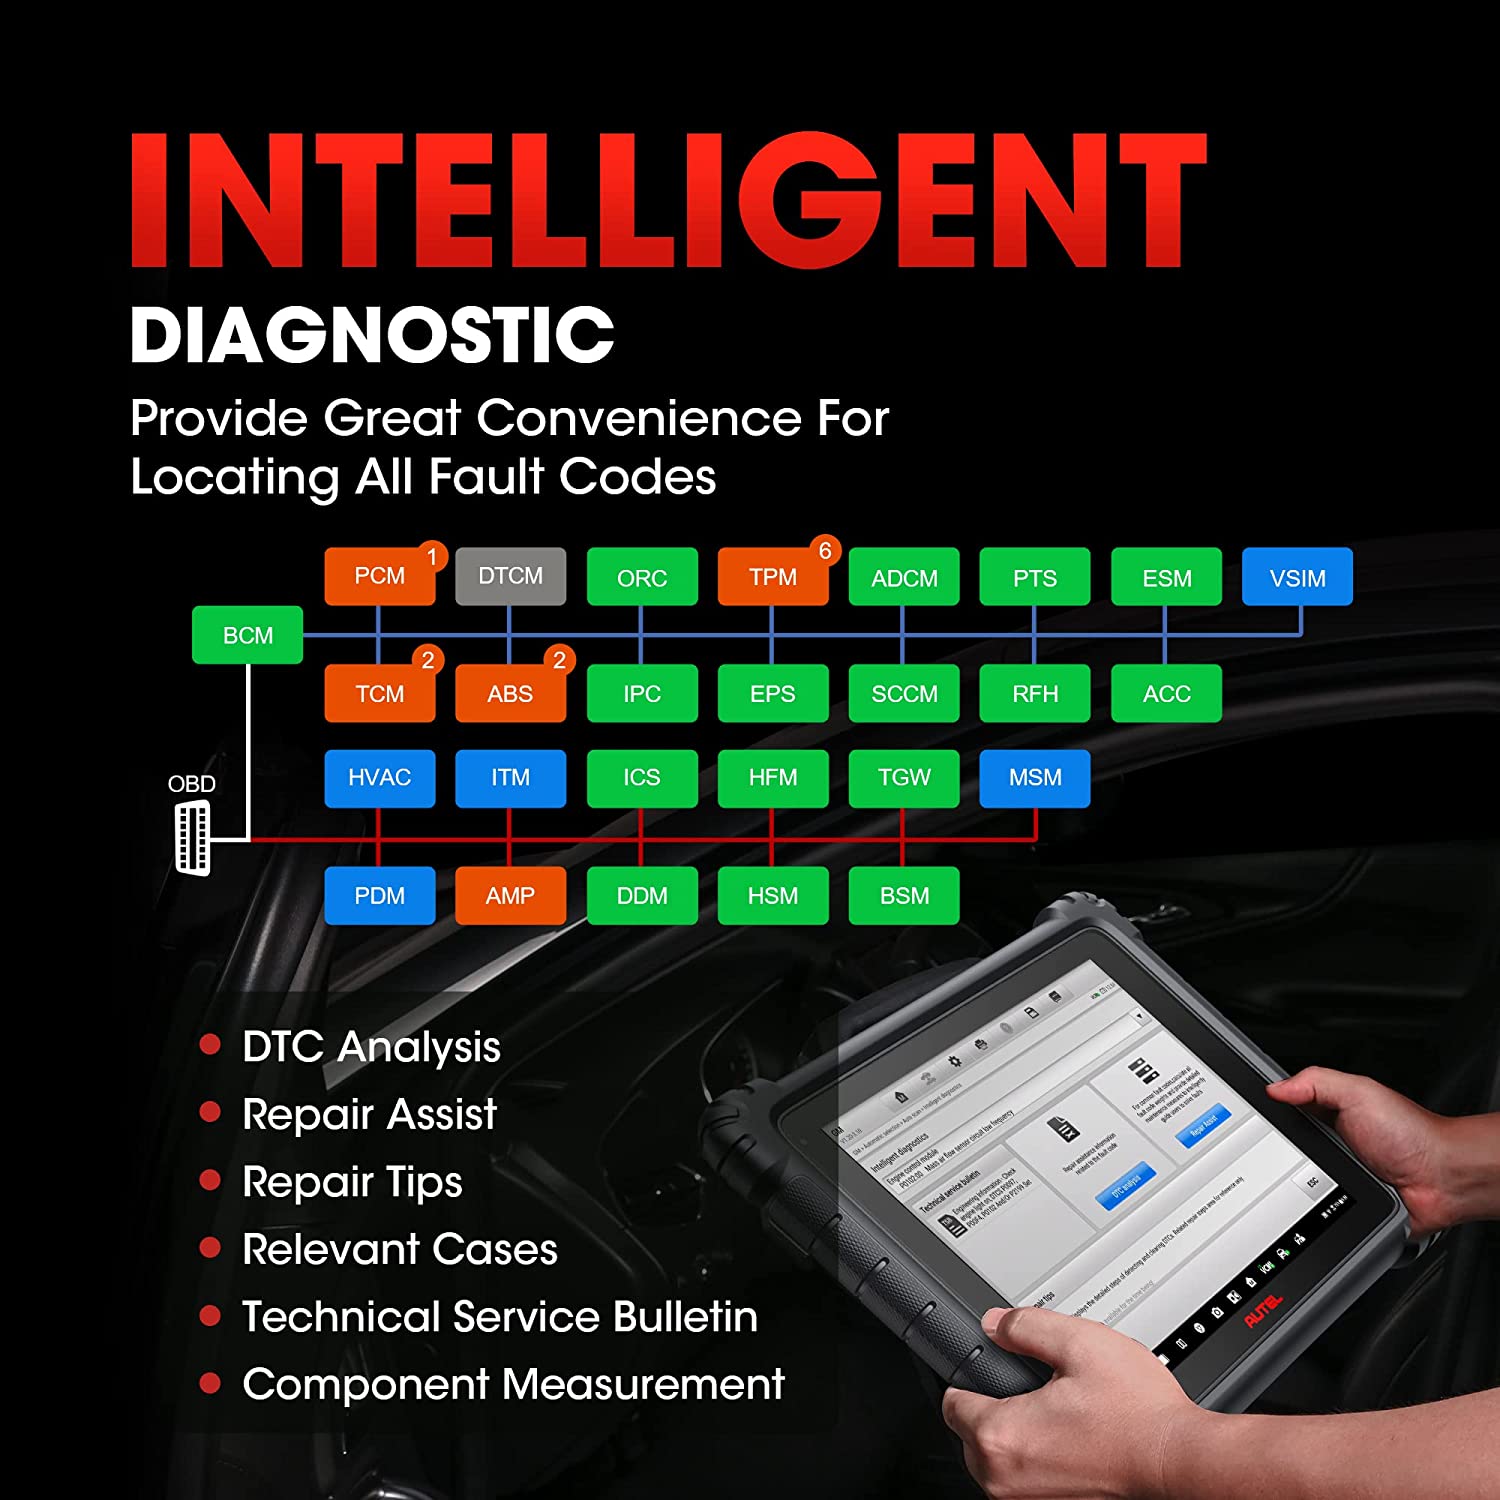 Autel 5-IN-1 MaxiSYS Ultra Automotive Intelligent 258GB Vehicle Dignostis Scan Tablet with J2534 ECU Programming 40+ Services, Upgrded of MS908S Pro/ Elite/ MS909/ MS919